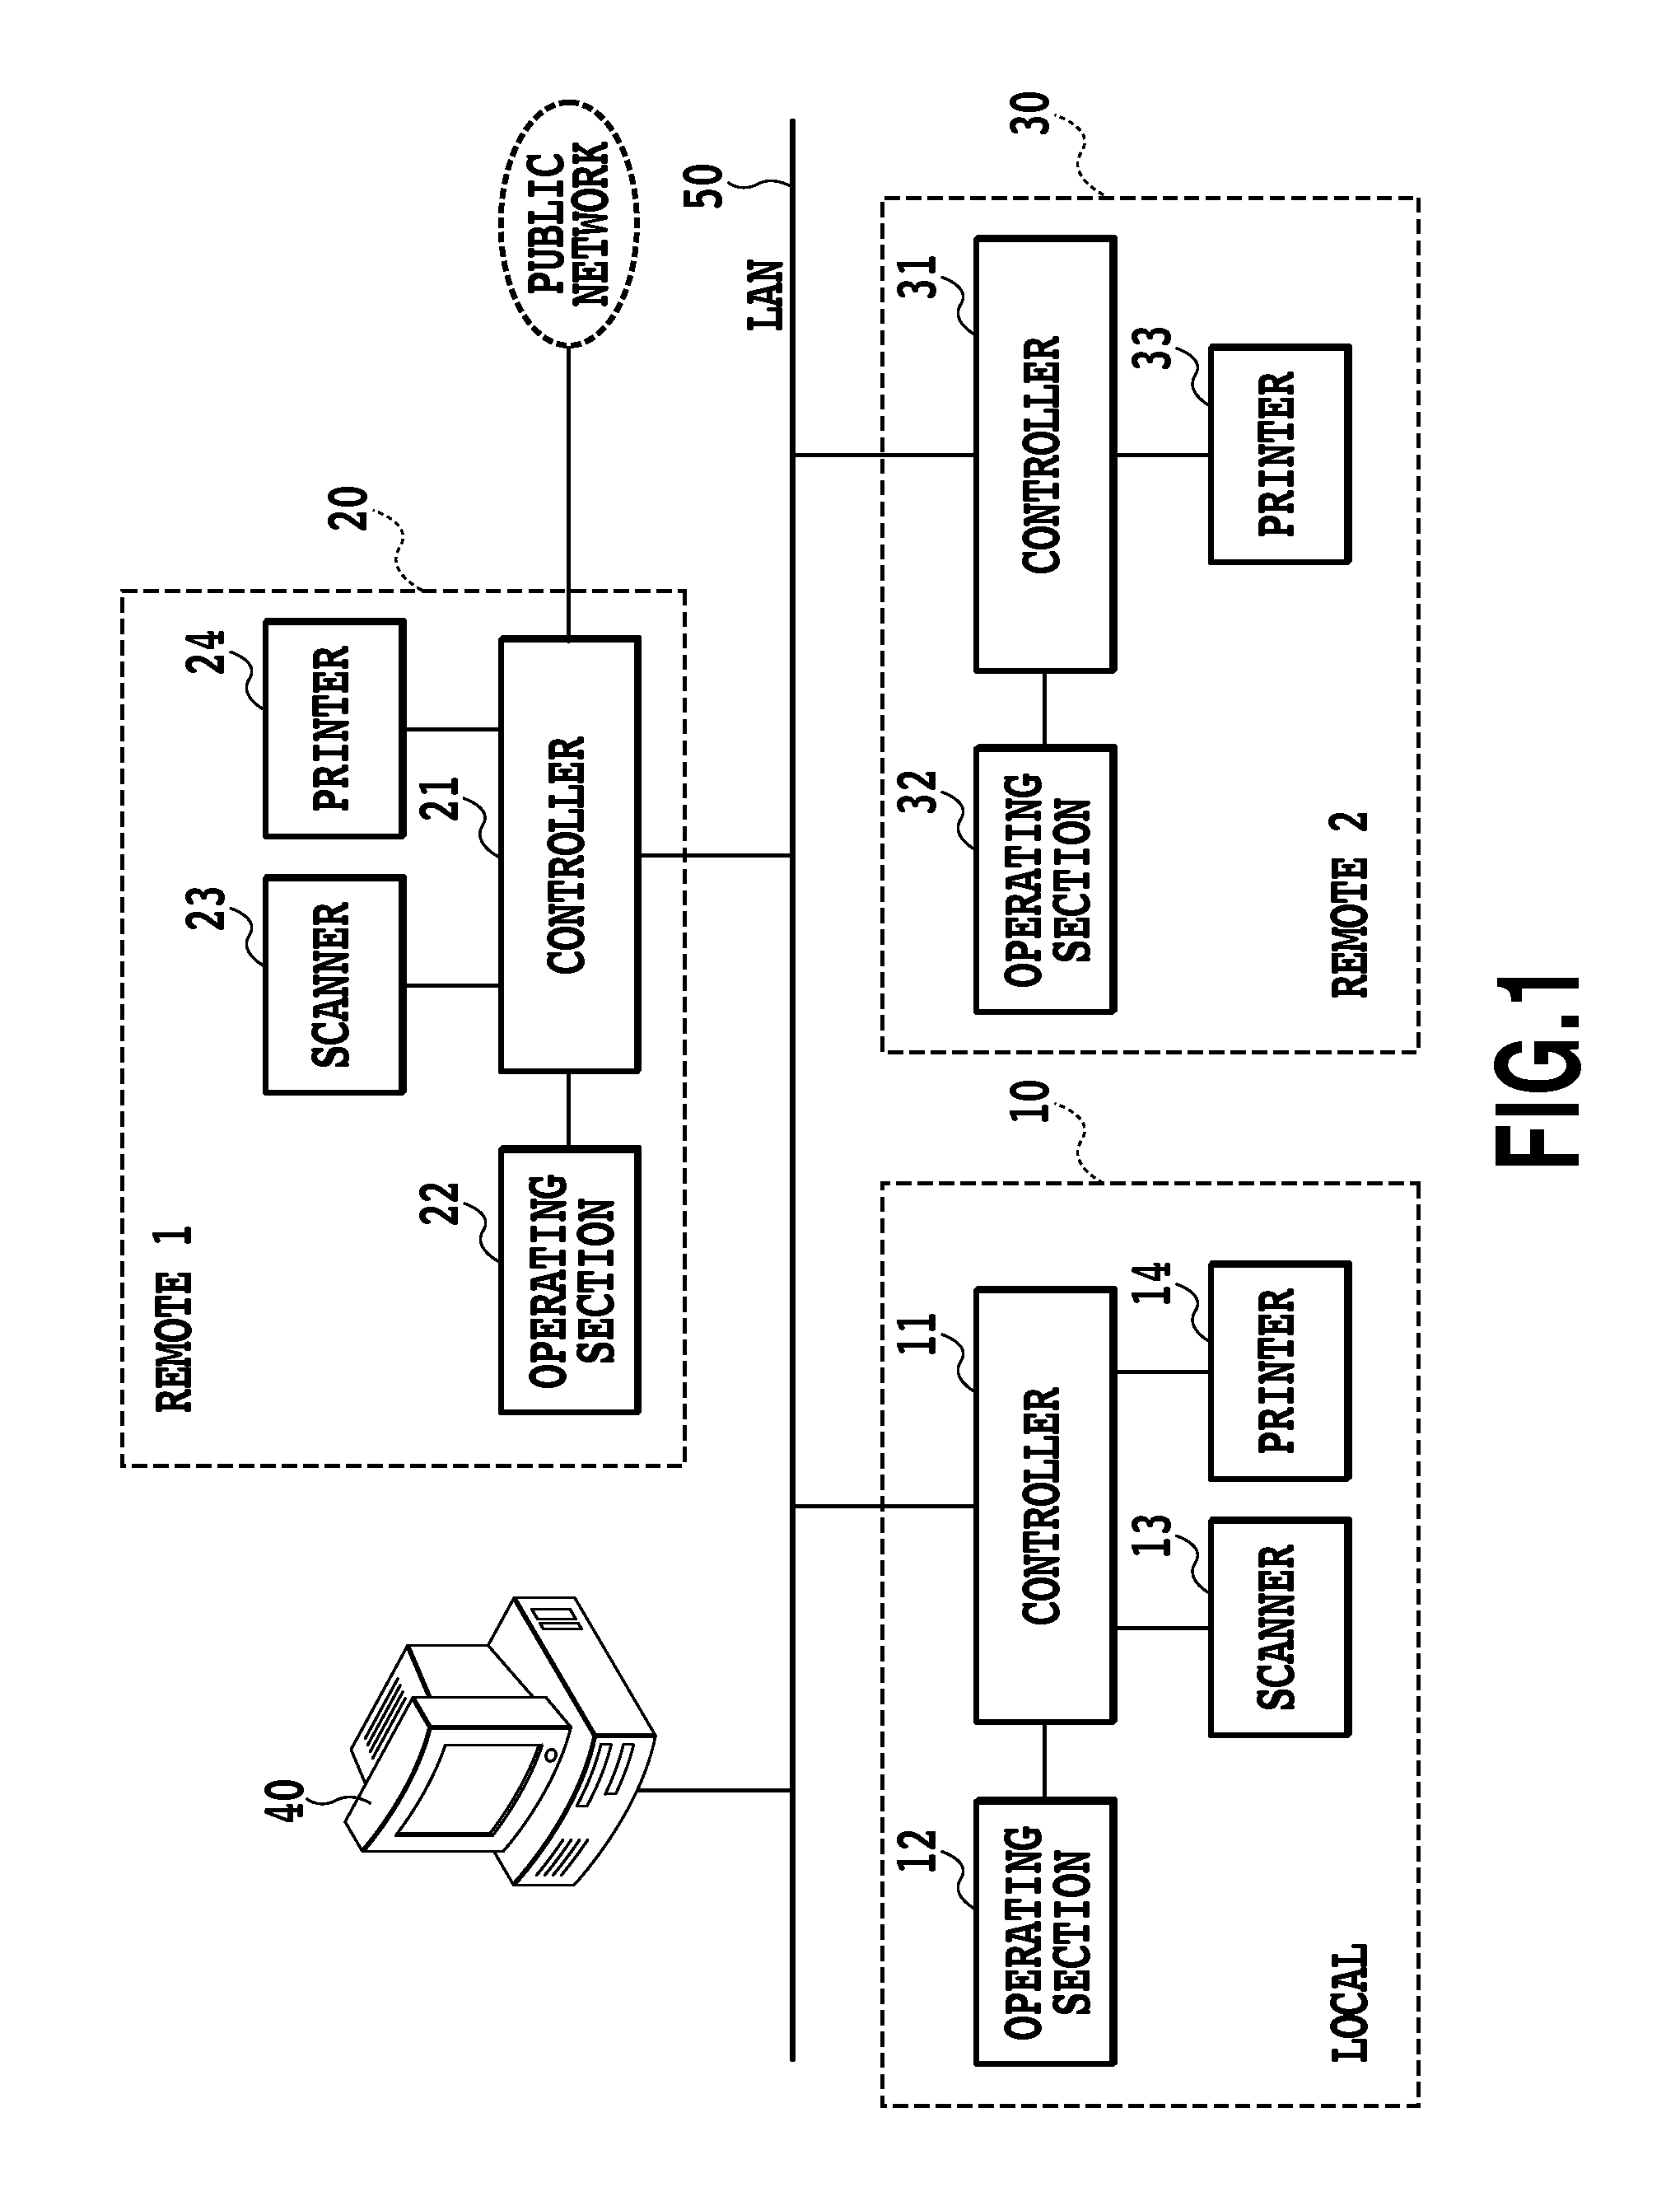 Image processing apparatus, image processing method, and program thereof